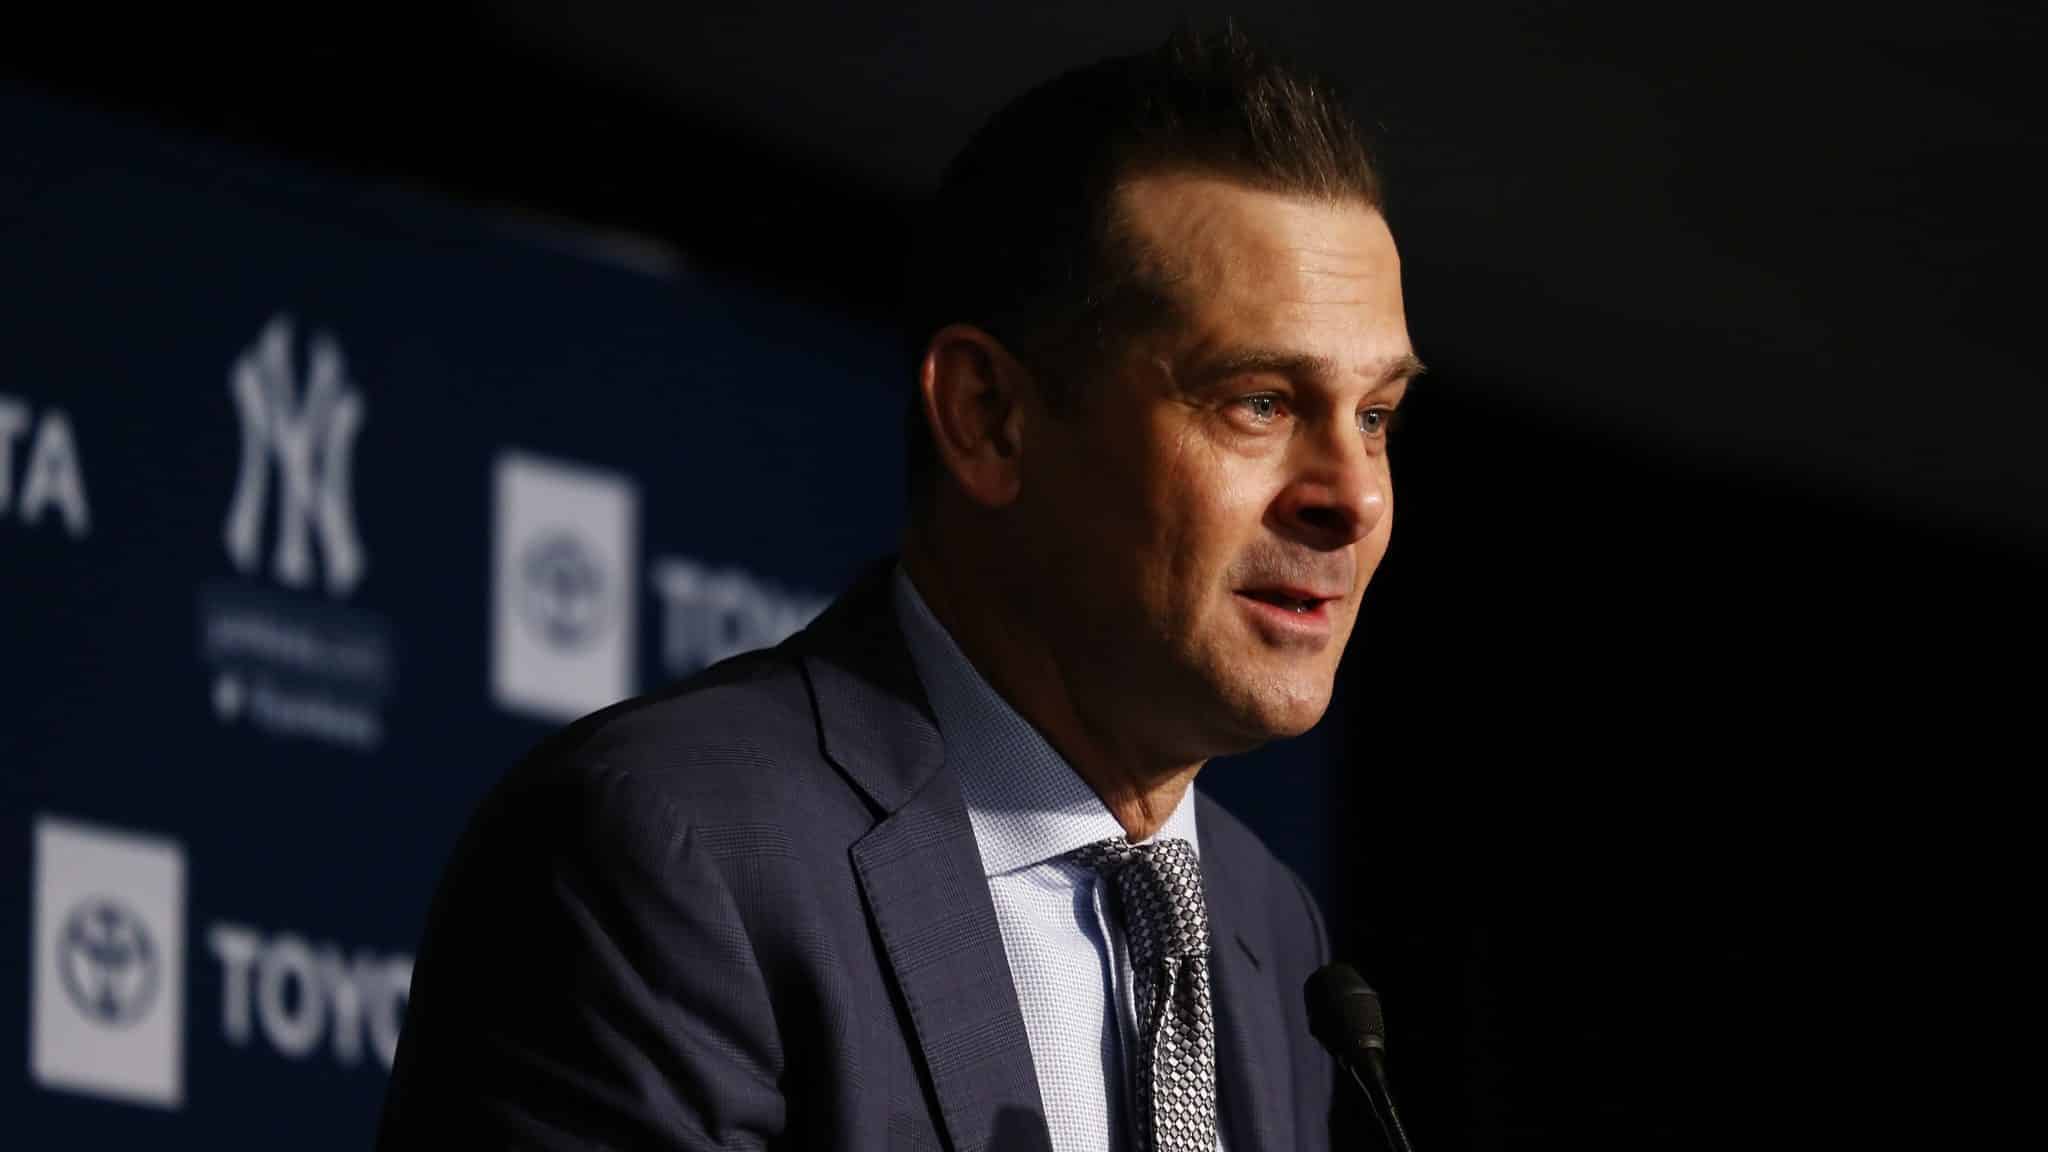 NEW YORK, NEW YORK - DECEMBER 18: New York Yankee manager Aaron Boone speaks to the media during the New York Yankees press conference to introduce Gerrit Cole at Yankee Stadium on December 18, 2019 in New York City.